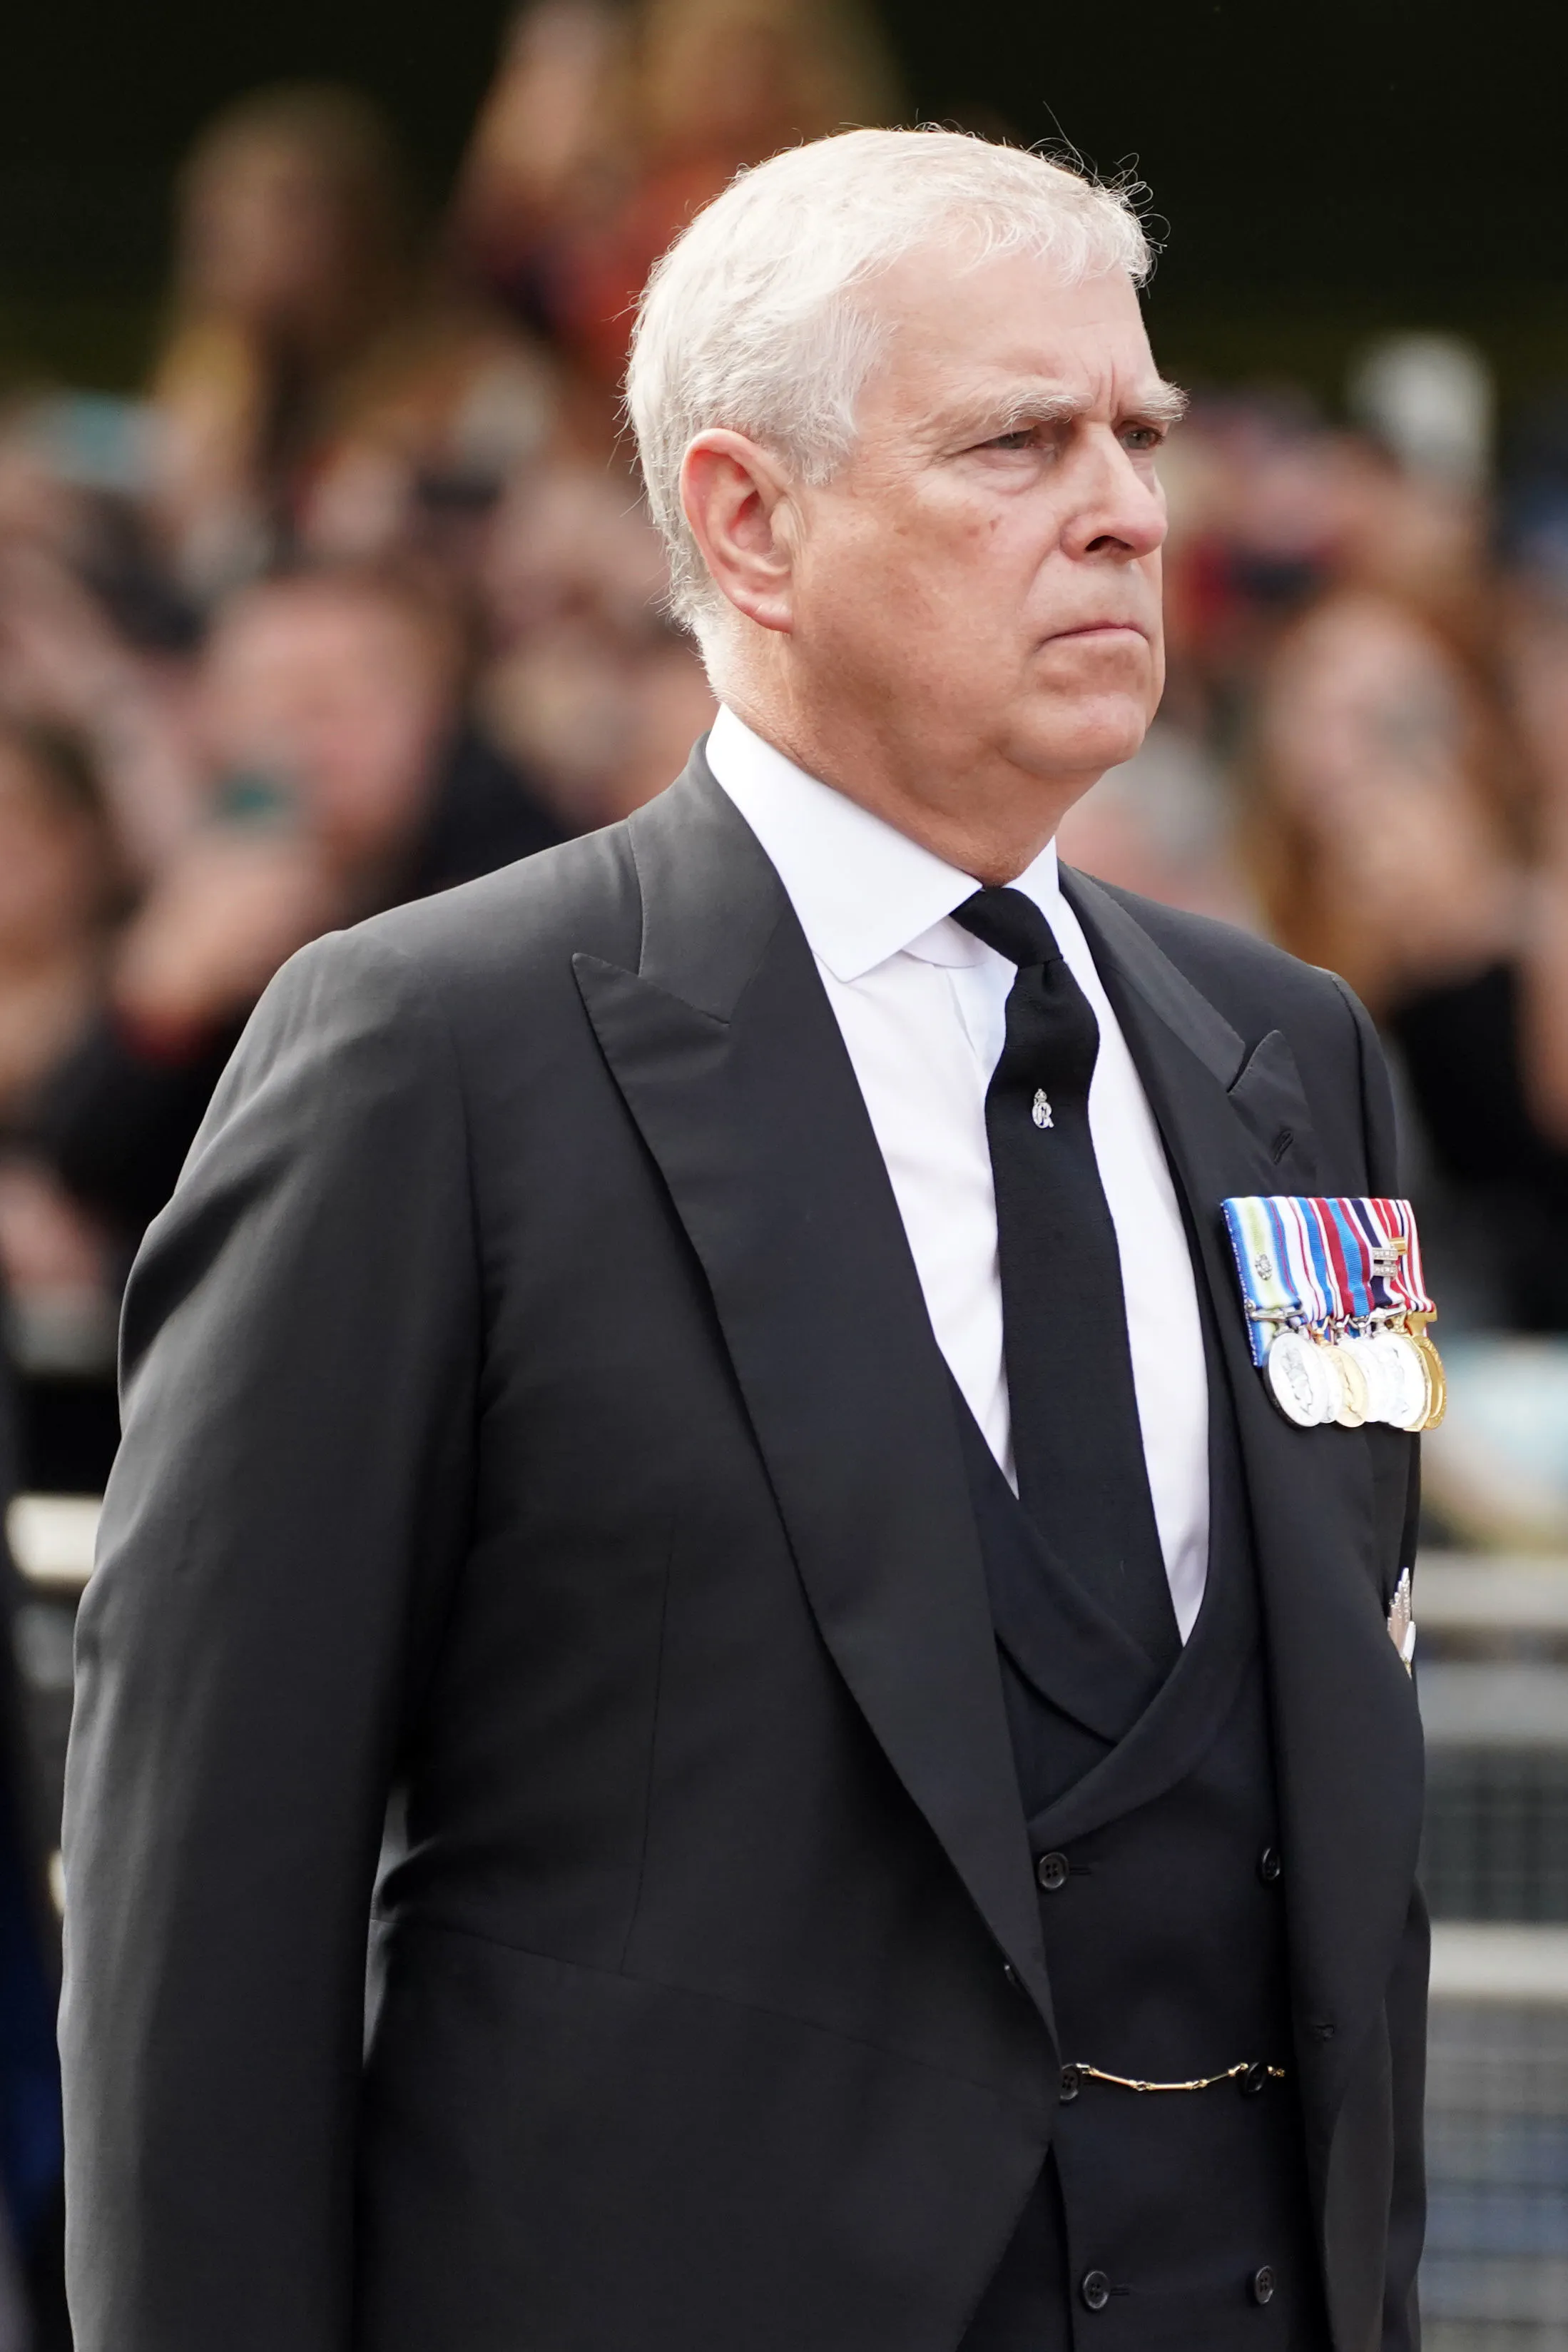 Prince Andrew faces new embarrassment after accuser Ms Giuffre ‘signs tell-all memoir deal’